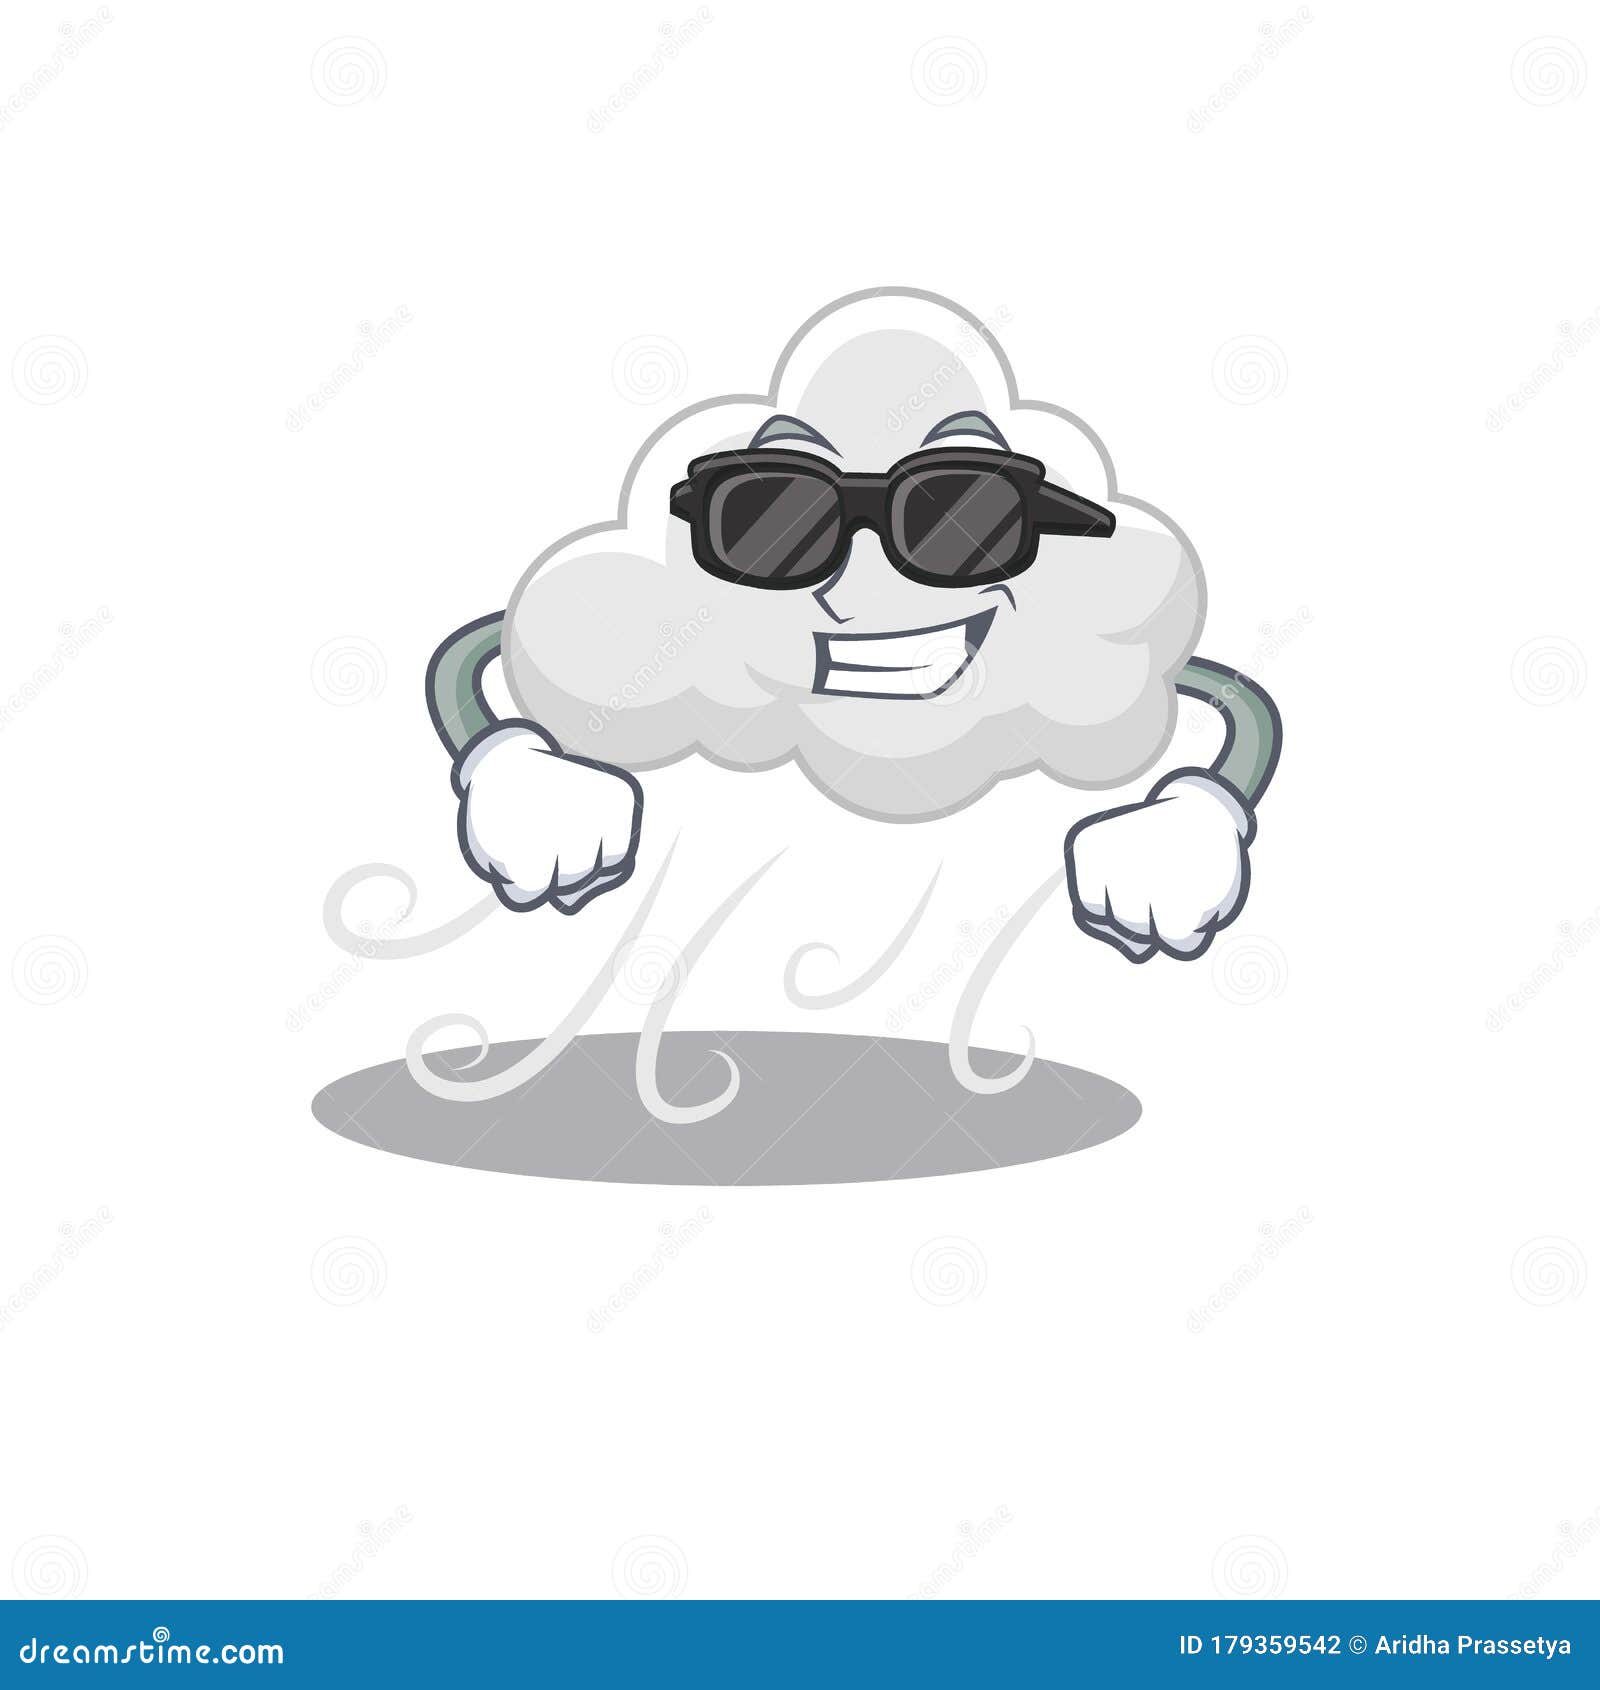 Cool Cloudy Windy Cartoon Character Wearing Expensive Black Glasses Stock  Vector - Illustration of movement, mascot: 179359542